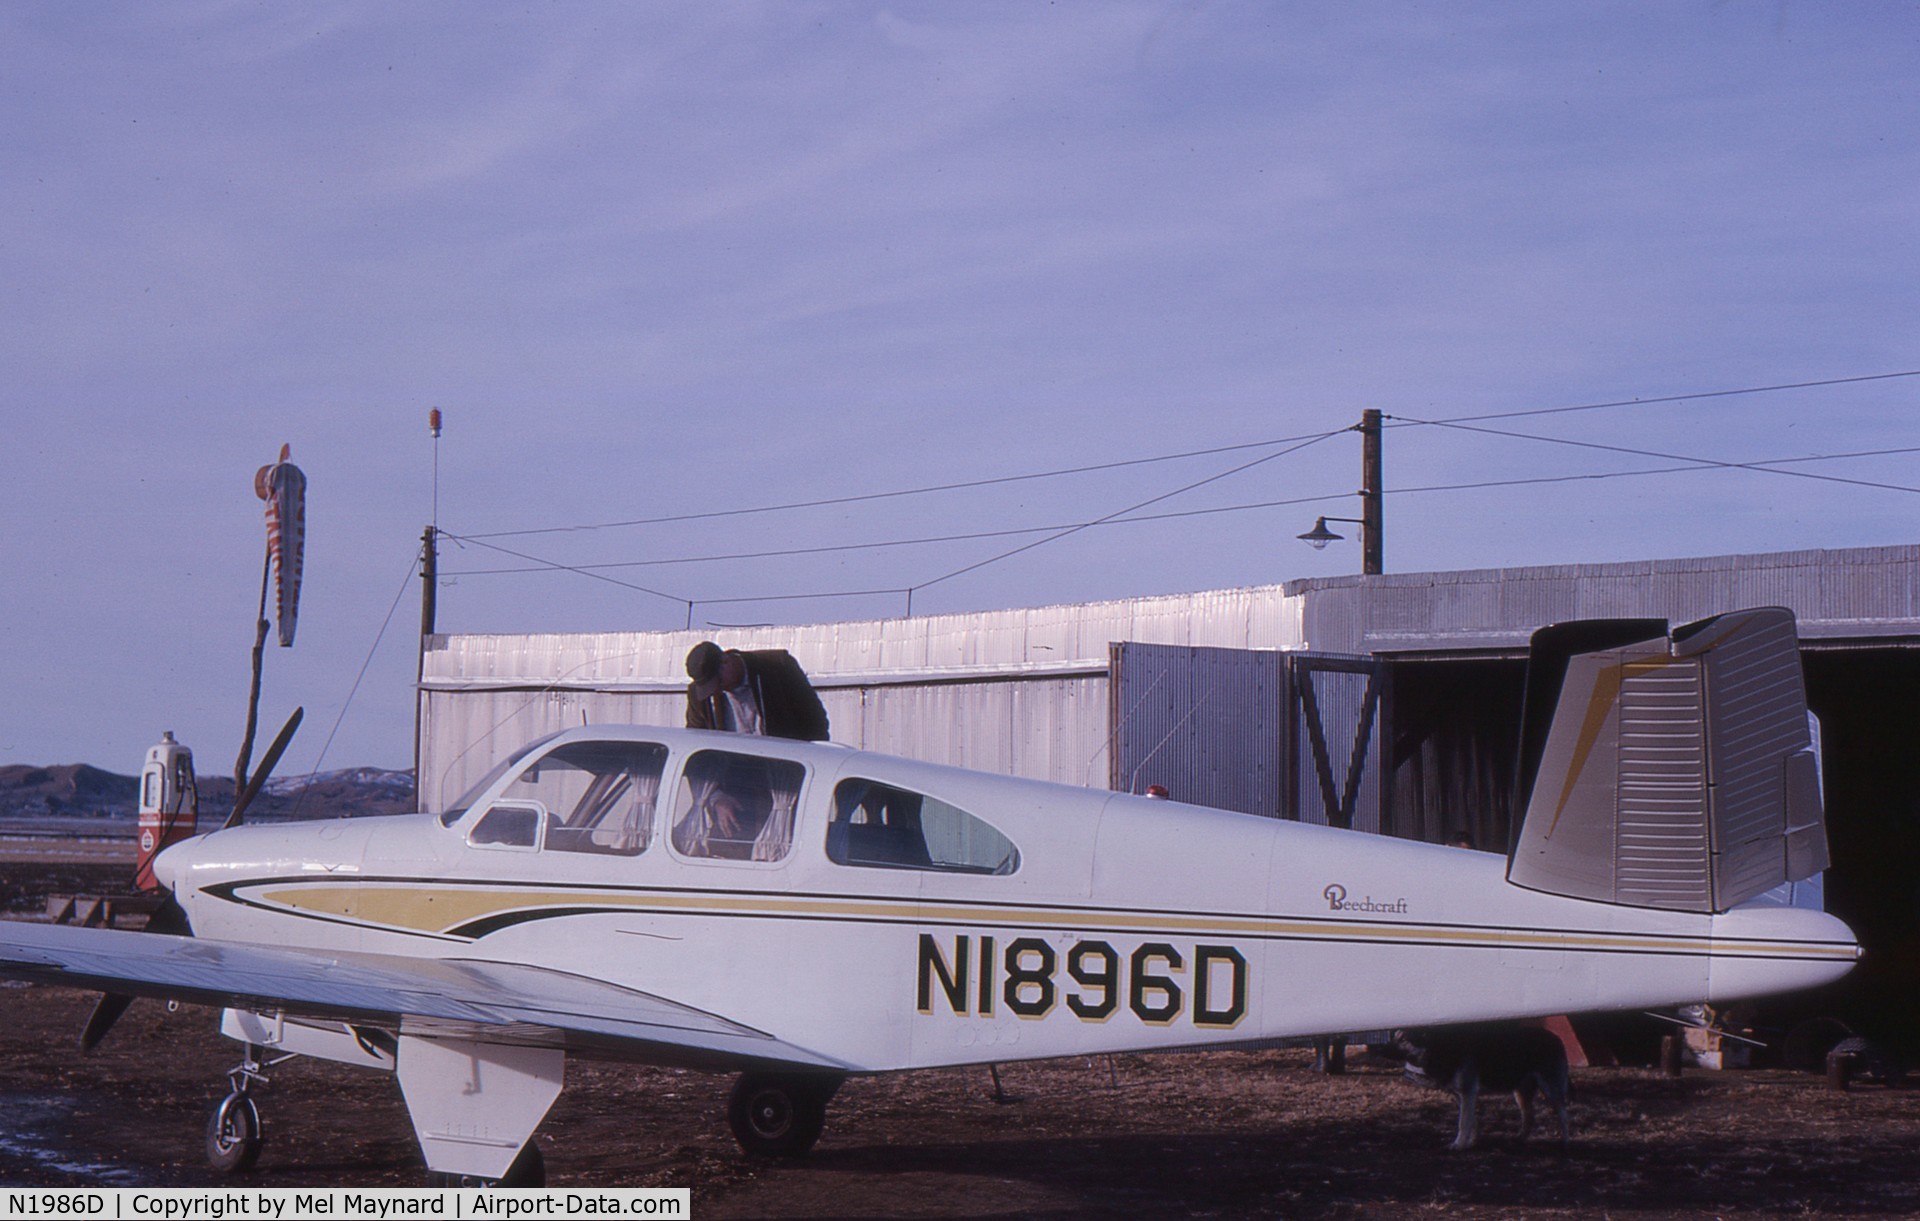 N1986D, 1952 Beech C35 Bonanza C/N D-3220, At the taking of the picture it was owned by Les Maynard of Smithland Iowa back in the sixties. He was a local farmer and Aerial Sprayer.